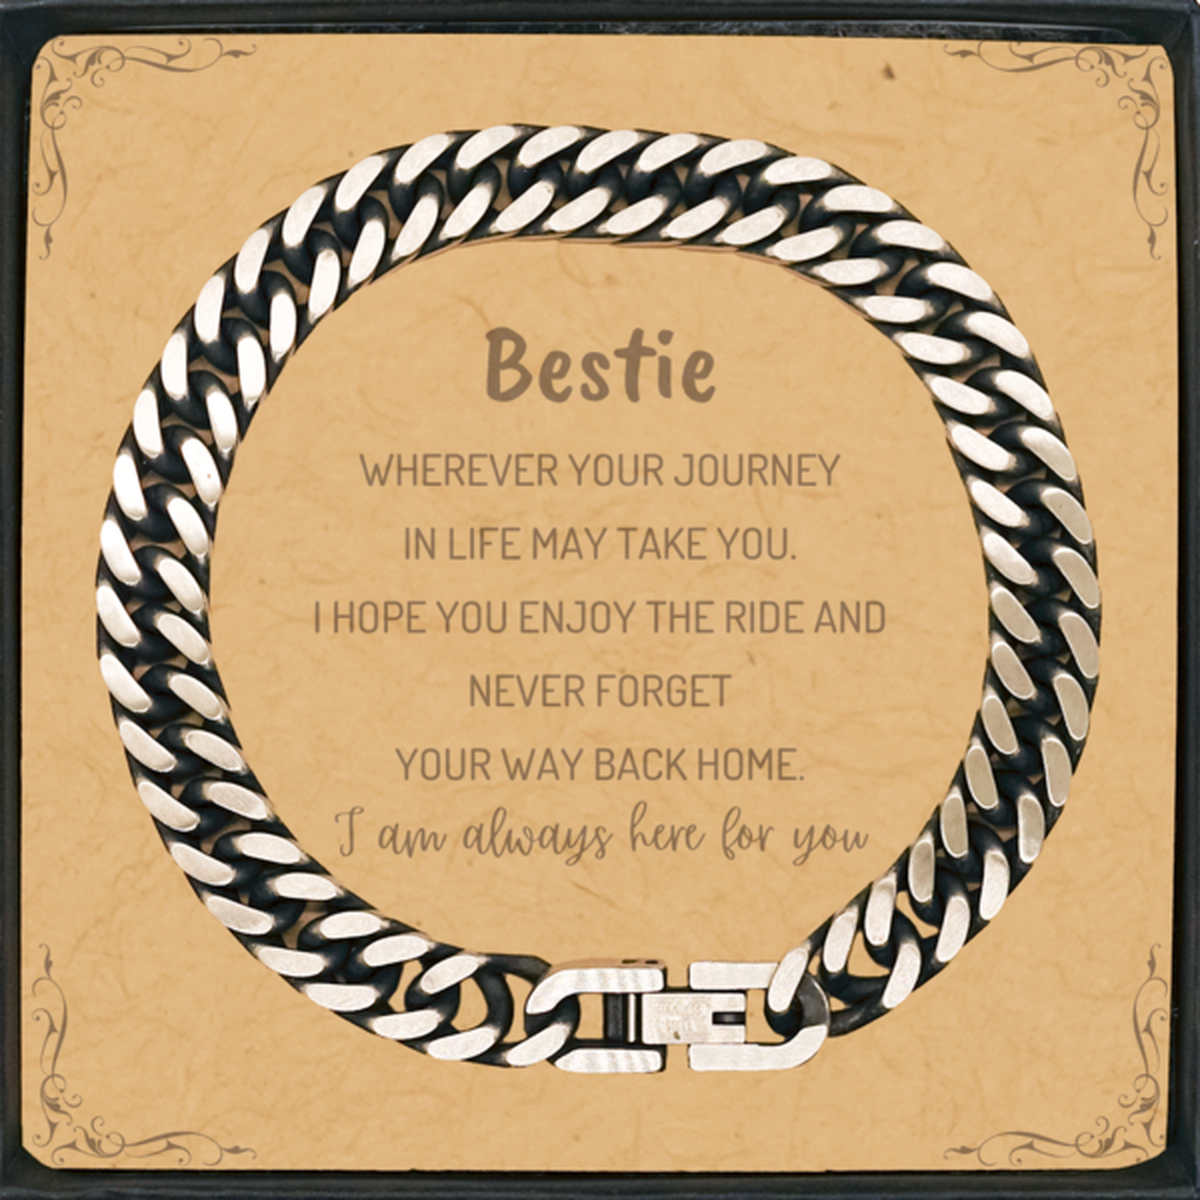 Bestie wherever your journey in life may take you, I am always here for you Bestie Cuban Link Chain Bracelet, Awesome Christmas Gifts For Bestie Message Card, Bestie Birthday Gifts for Men Women Family Loved One